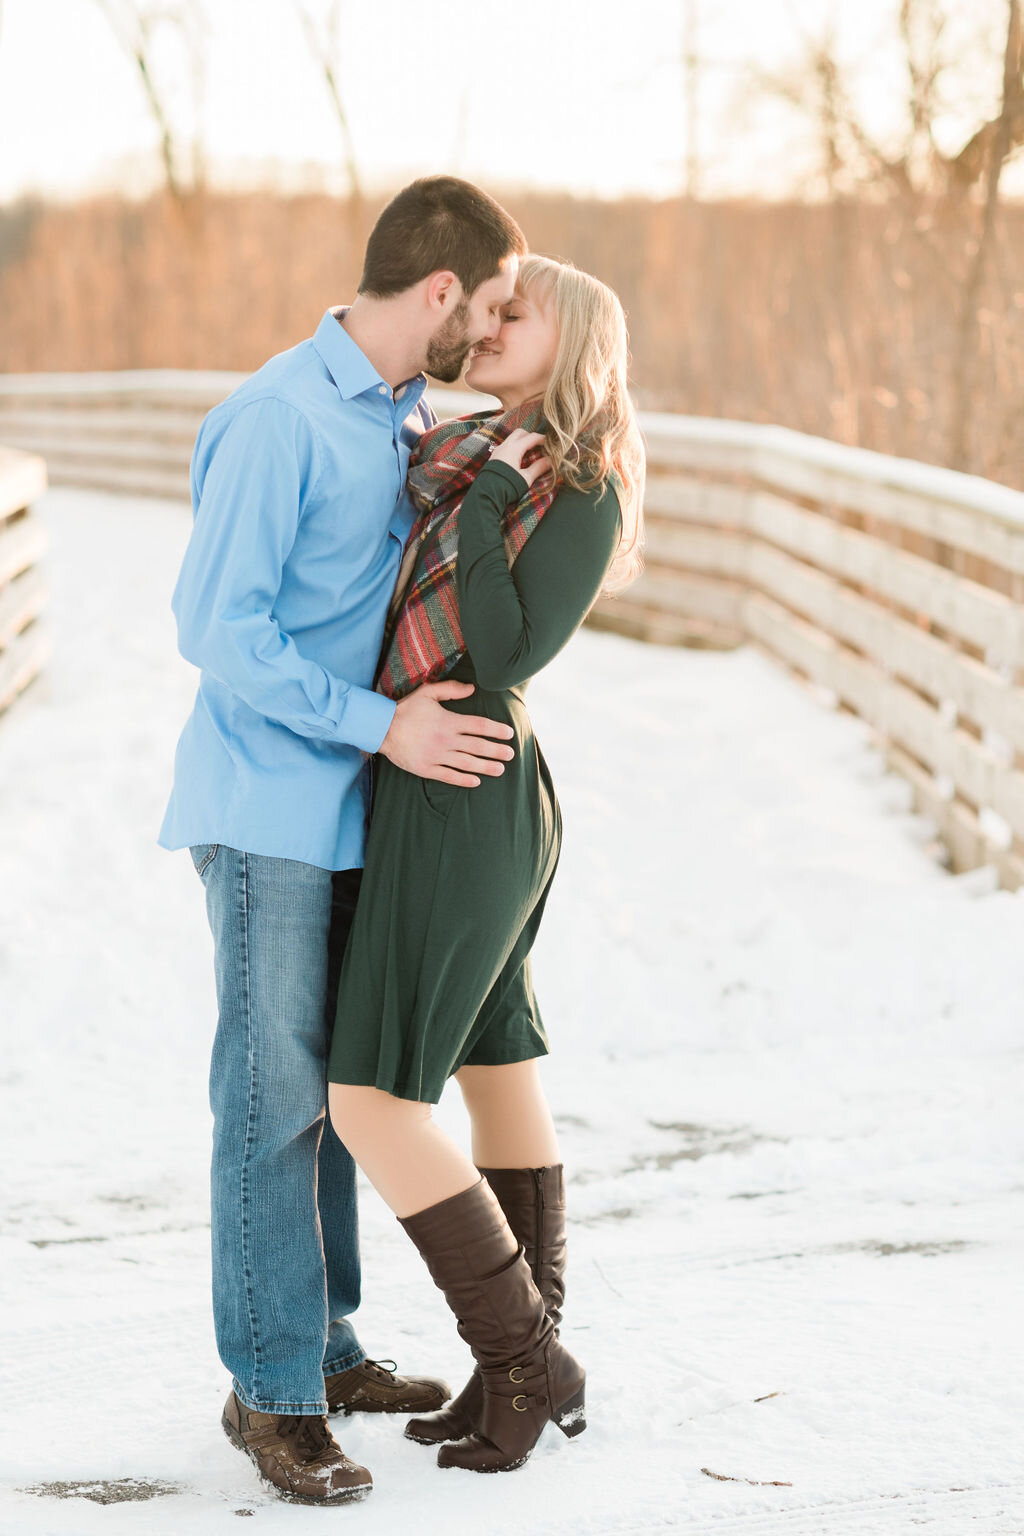 Engaged couple kissing on a snowy bridge